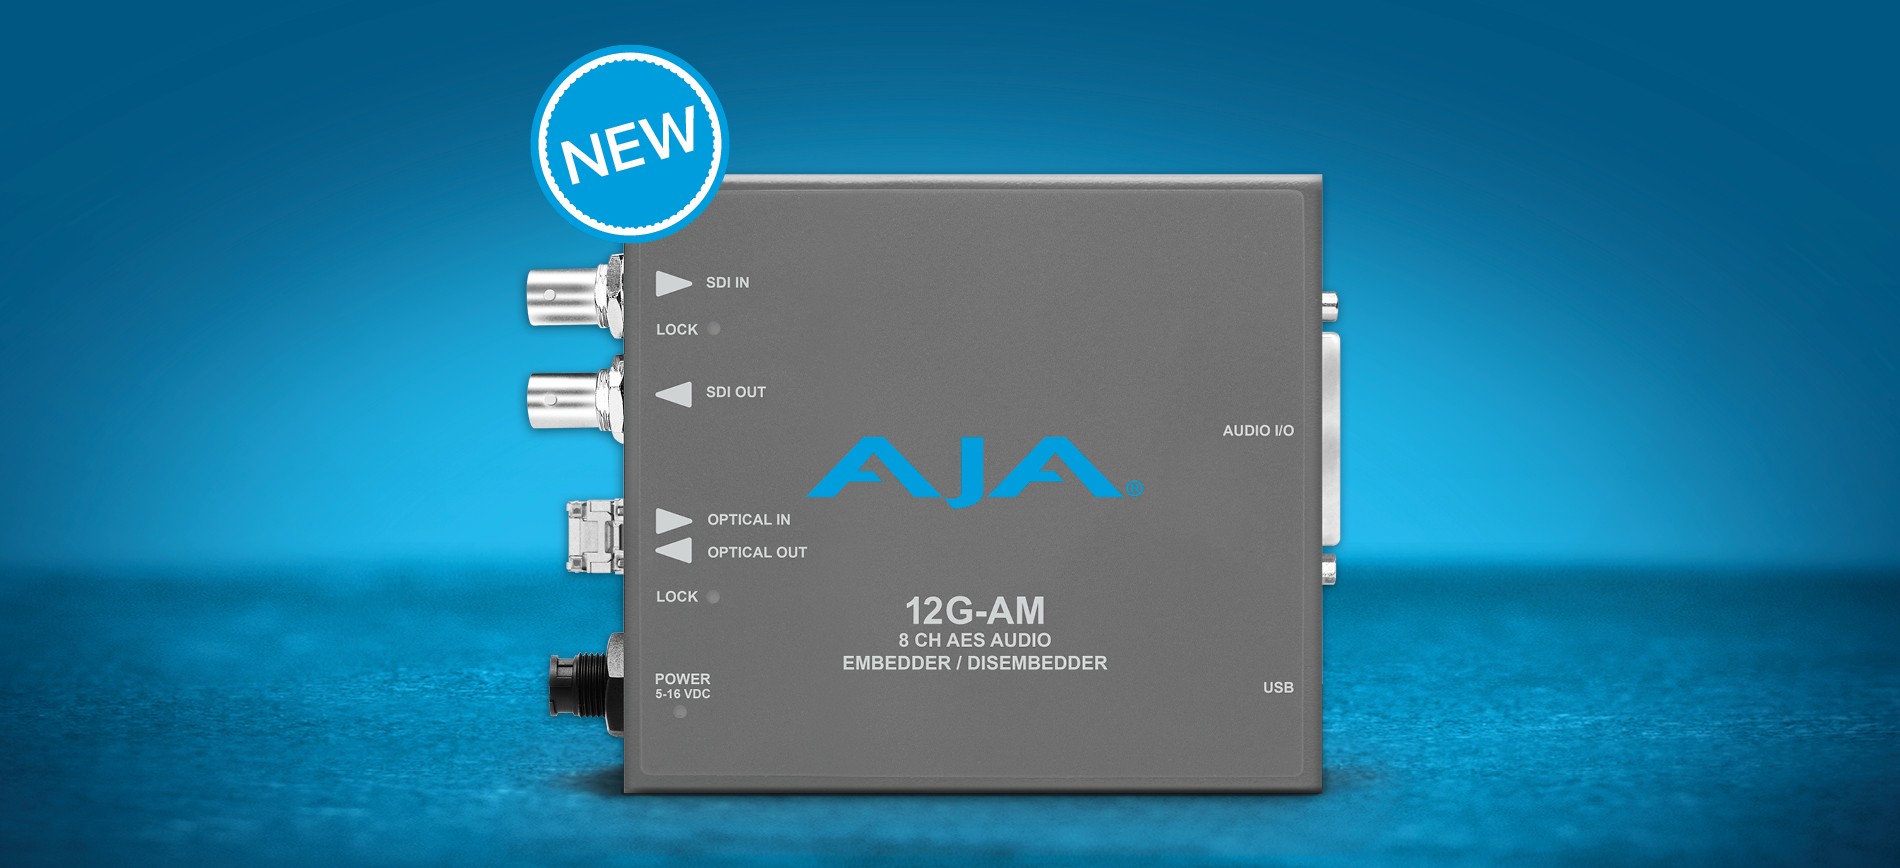 AJA Releases 12G-AM